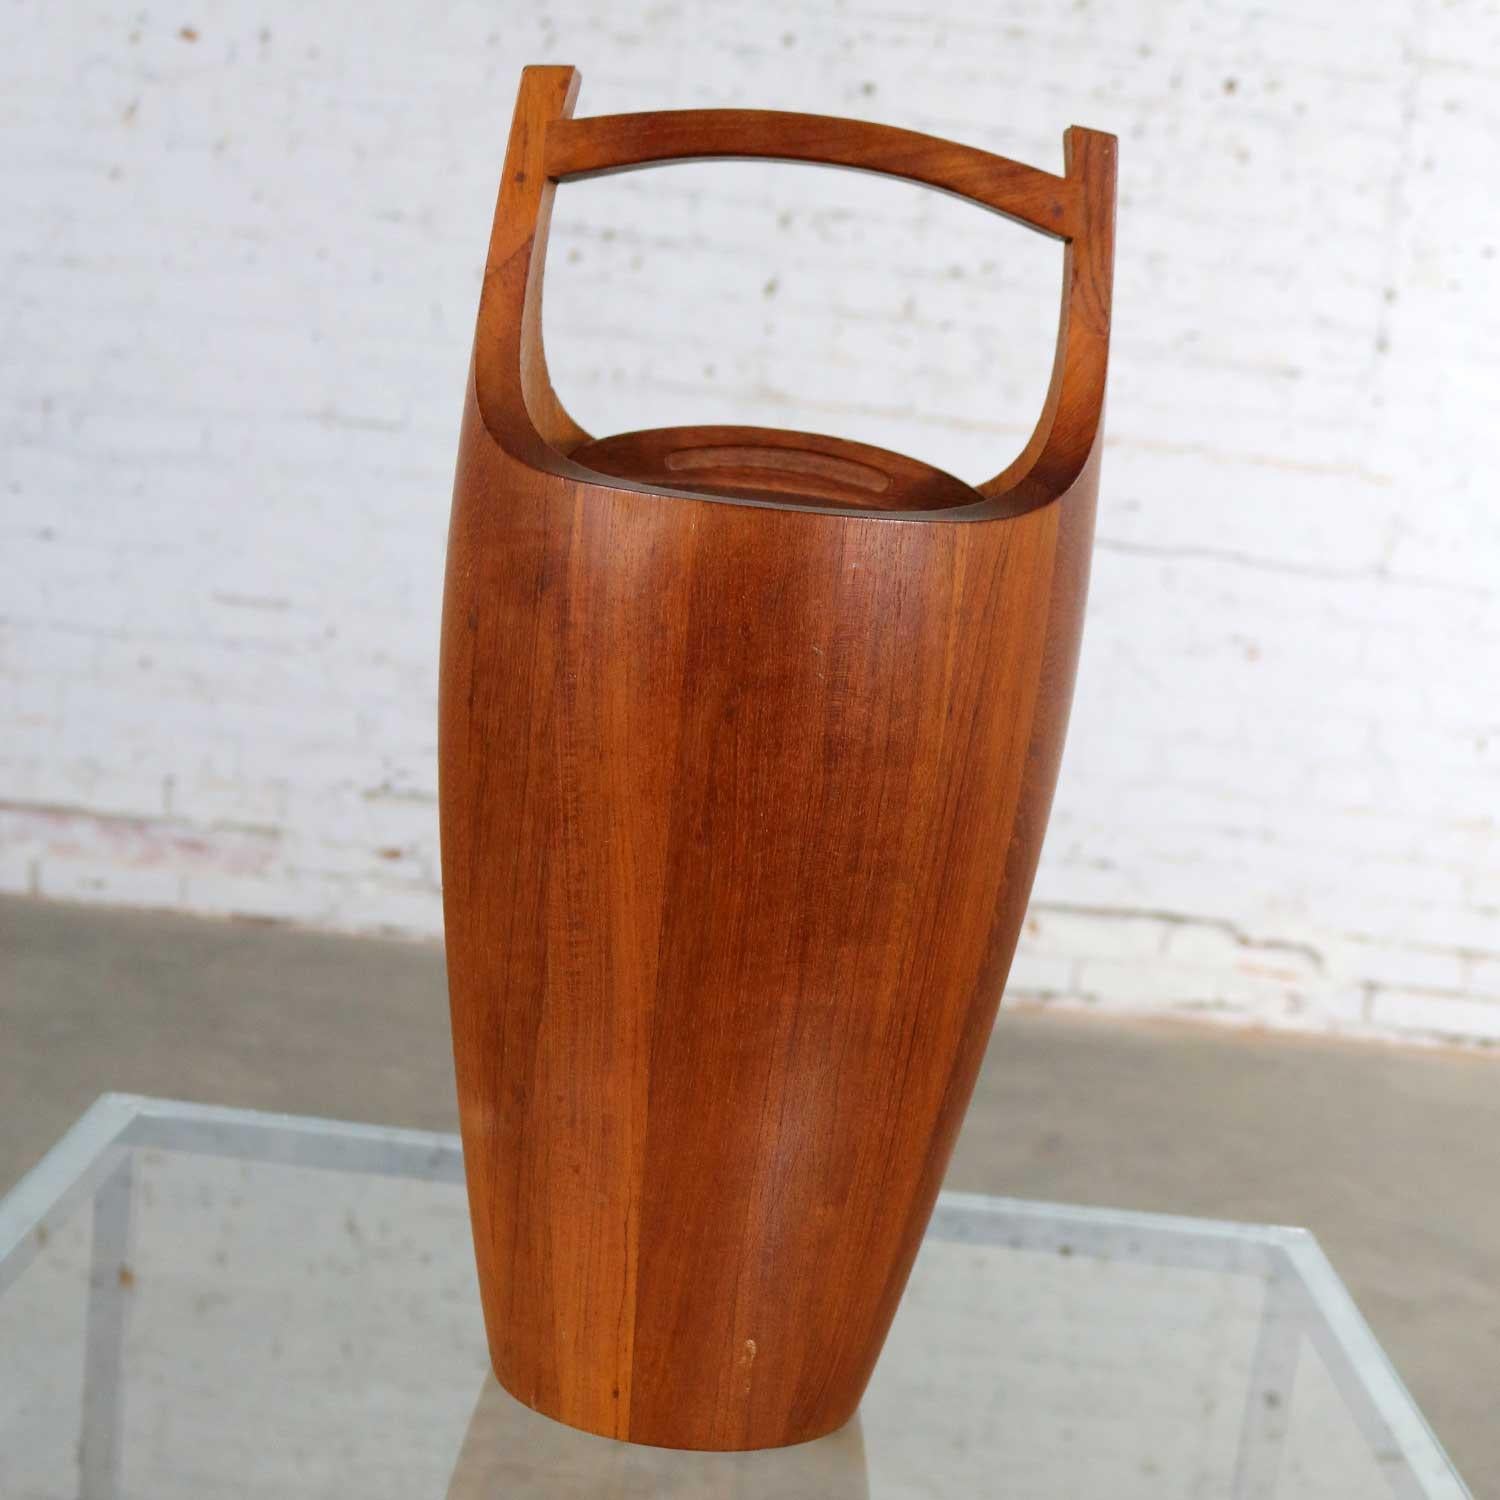 Handsome and iconic staved teak ice bucket by Jens Quistgaard for Dansk. This is the monumental 19.25-inch-tall example. It is in outstanding vintage condition, circa 1950s-1960s.

Now this is an ice bucket!!! Overscaled and gorgeous this staved